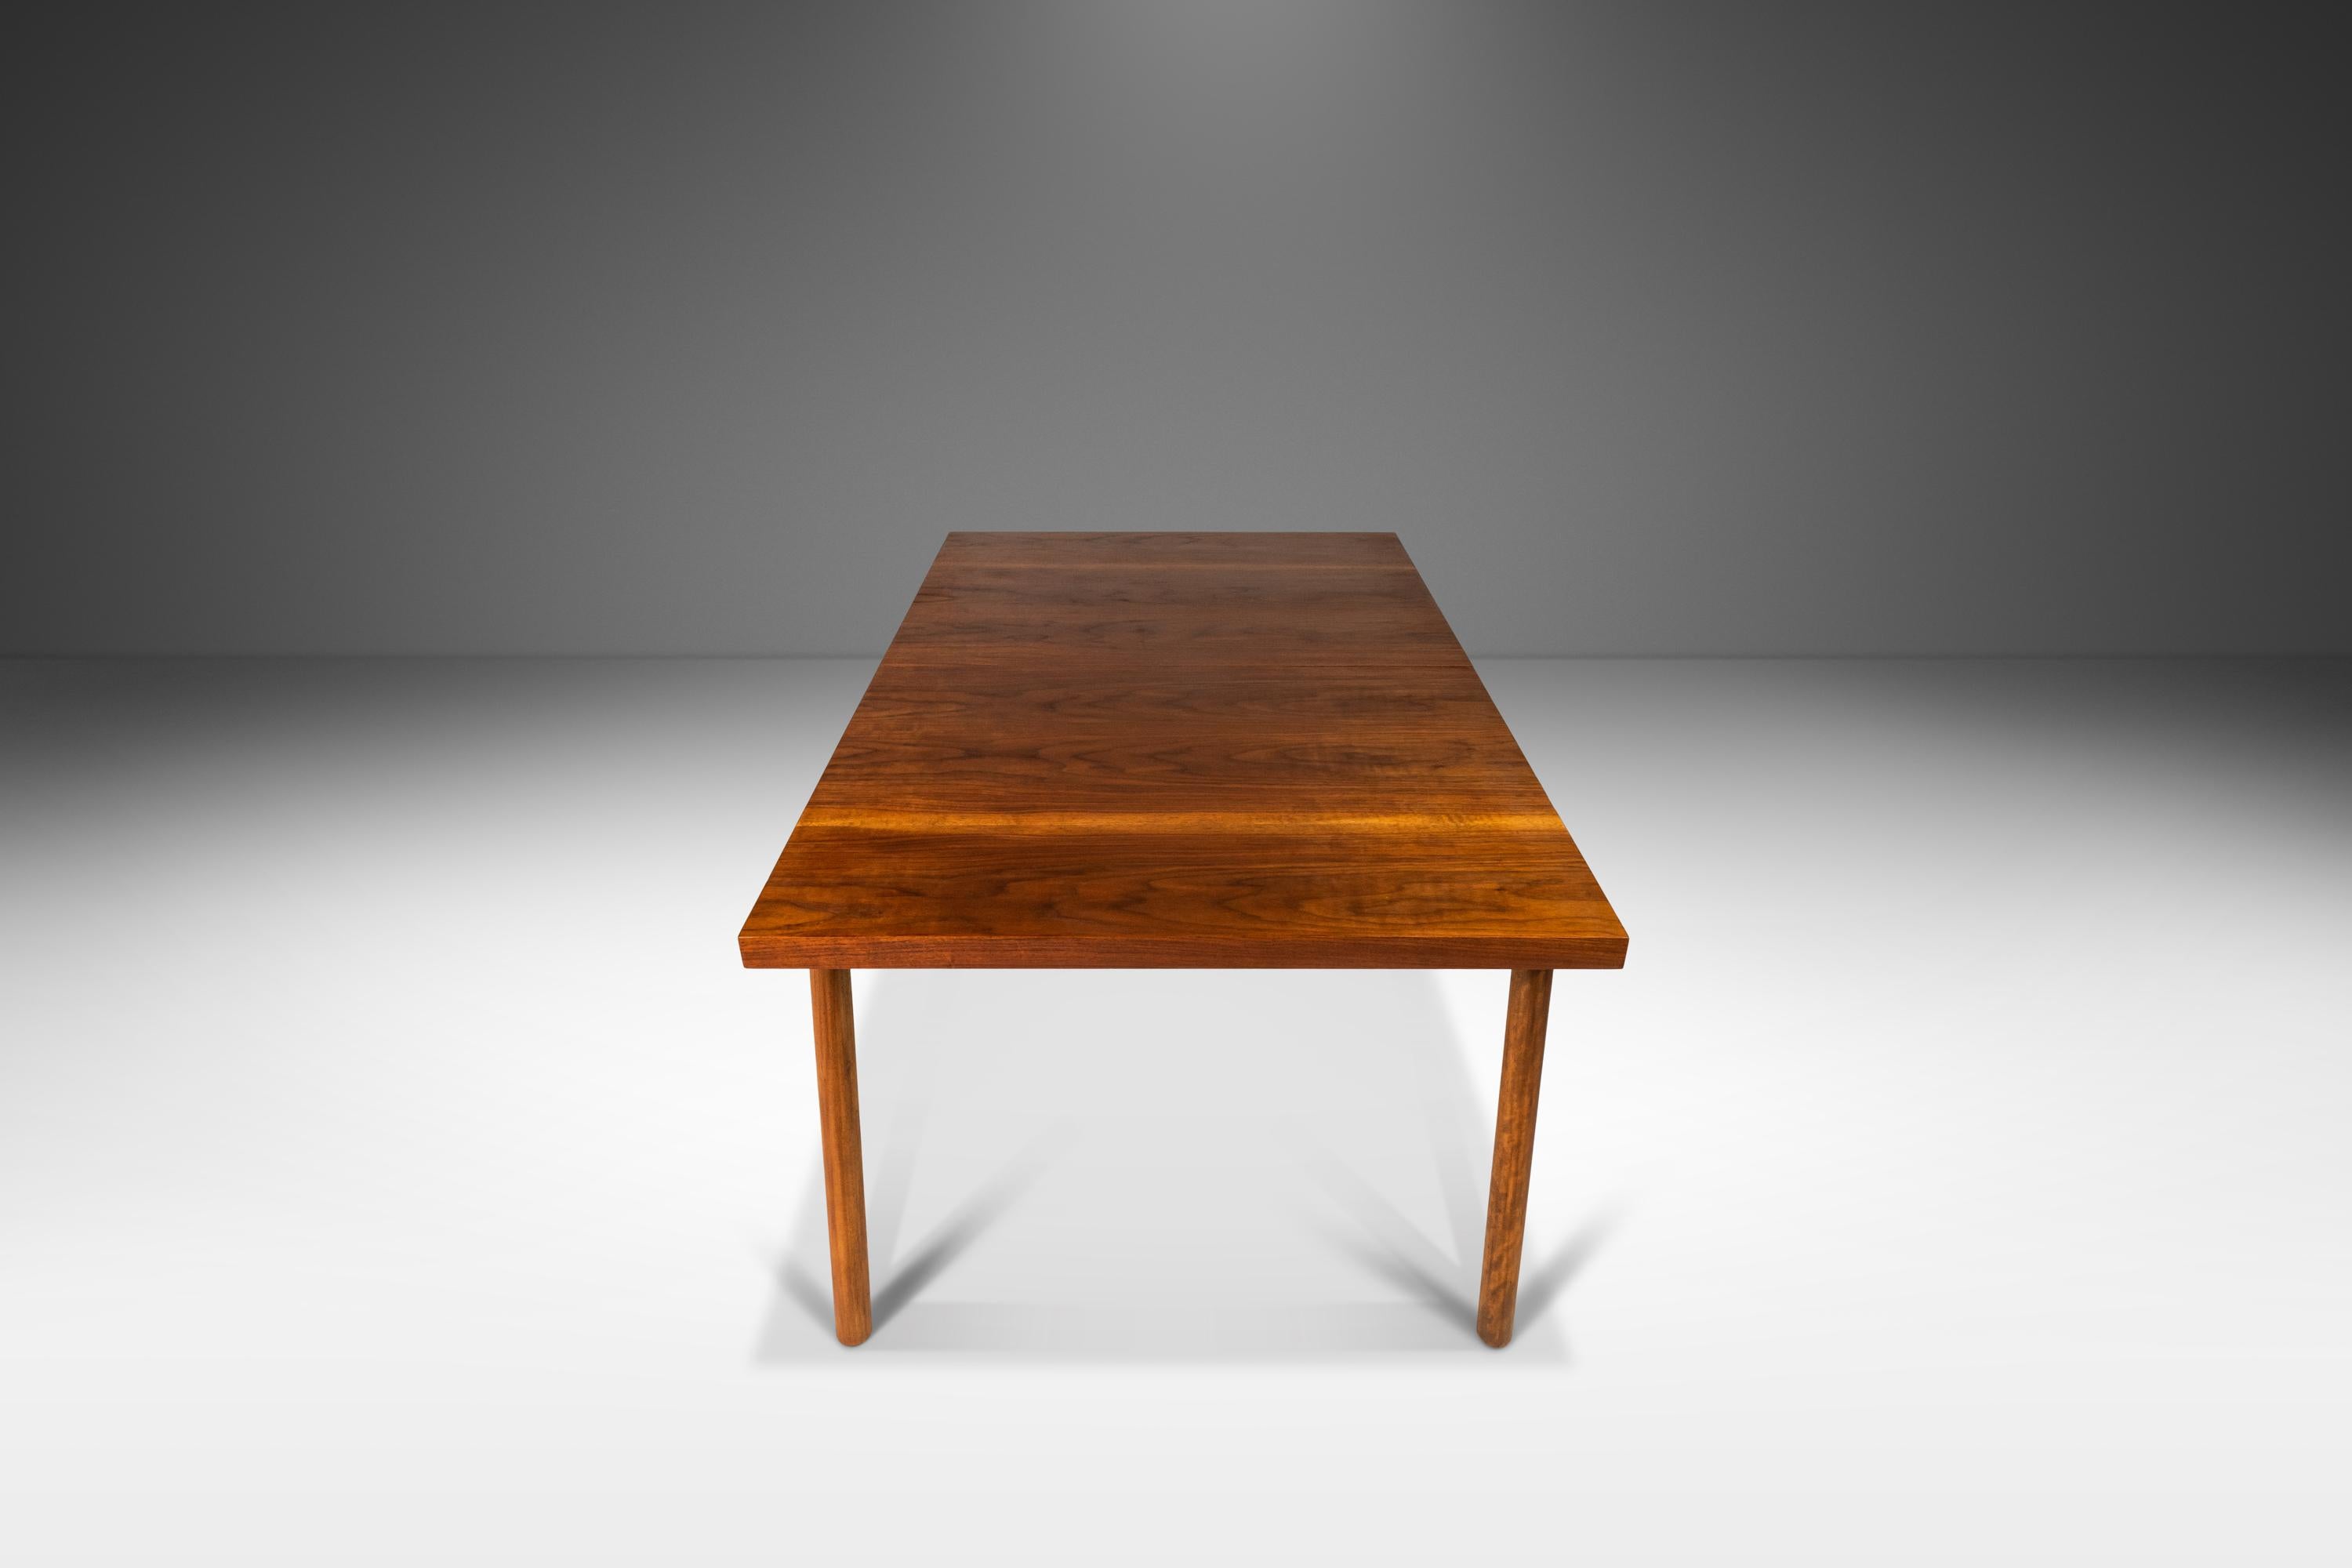 Mid-Century Modern Expansion Dining Table in Walnut by T.H. Robsjohn-Gibbings for Widdicomb, 1950's